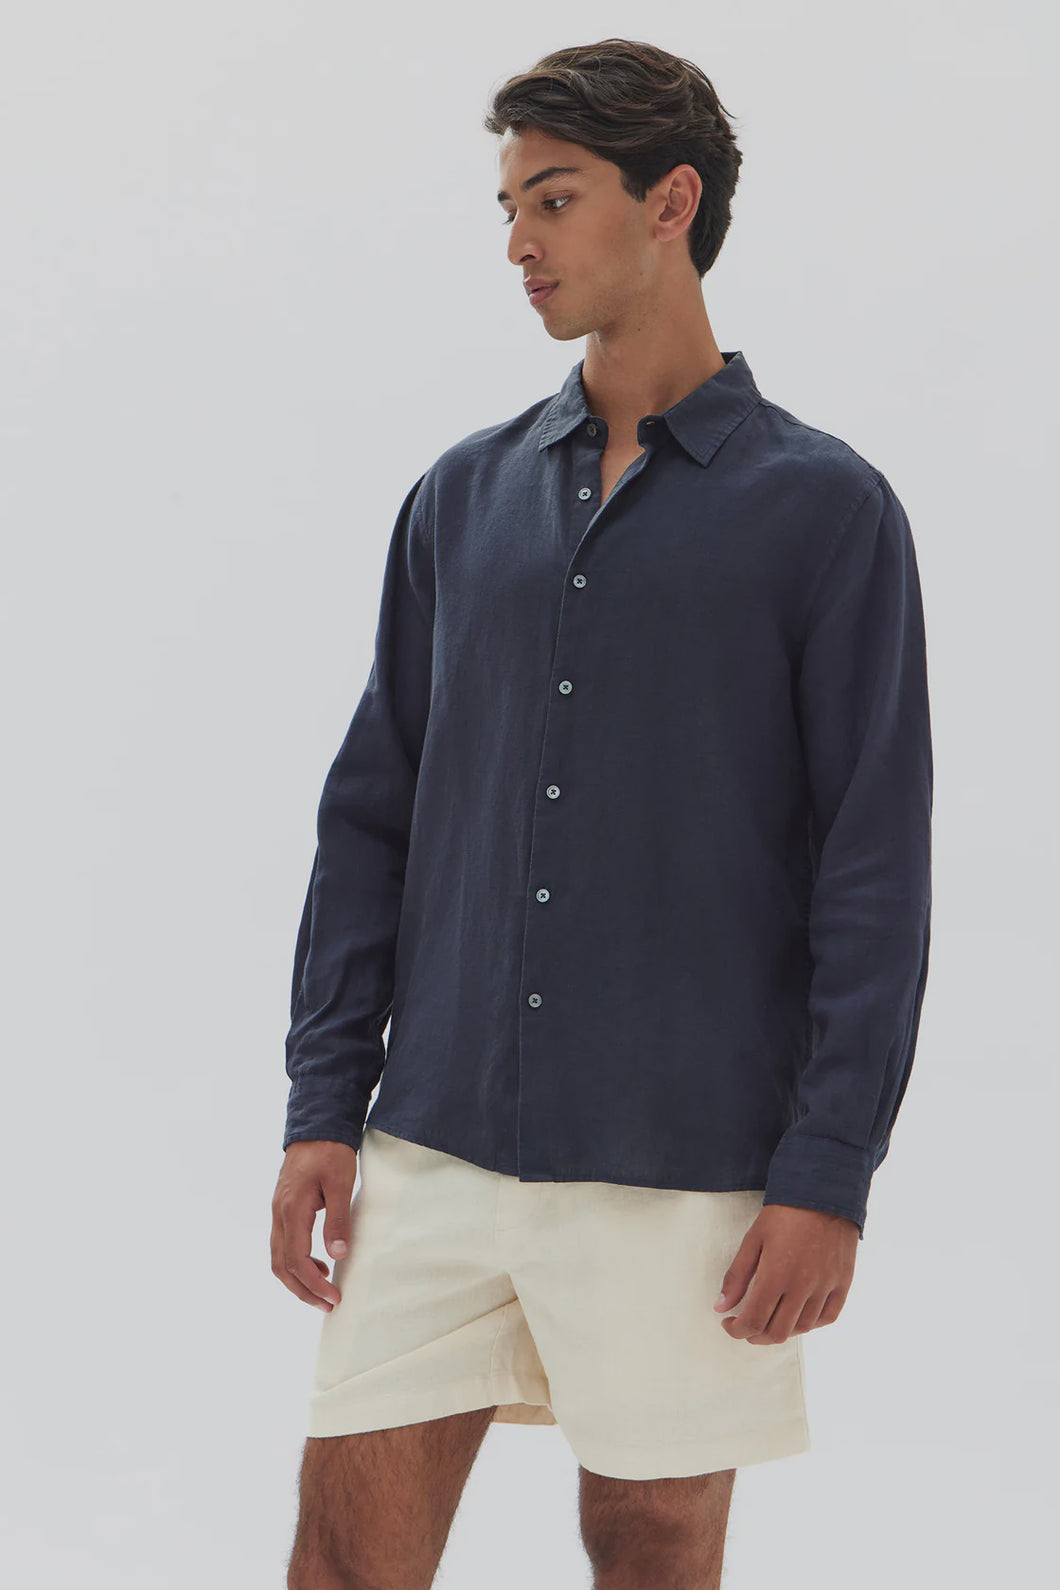 ASSEMBLY - CASUAL L/S SHIRT - TRUE NAVY